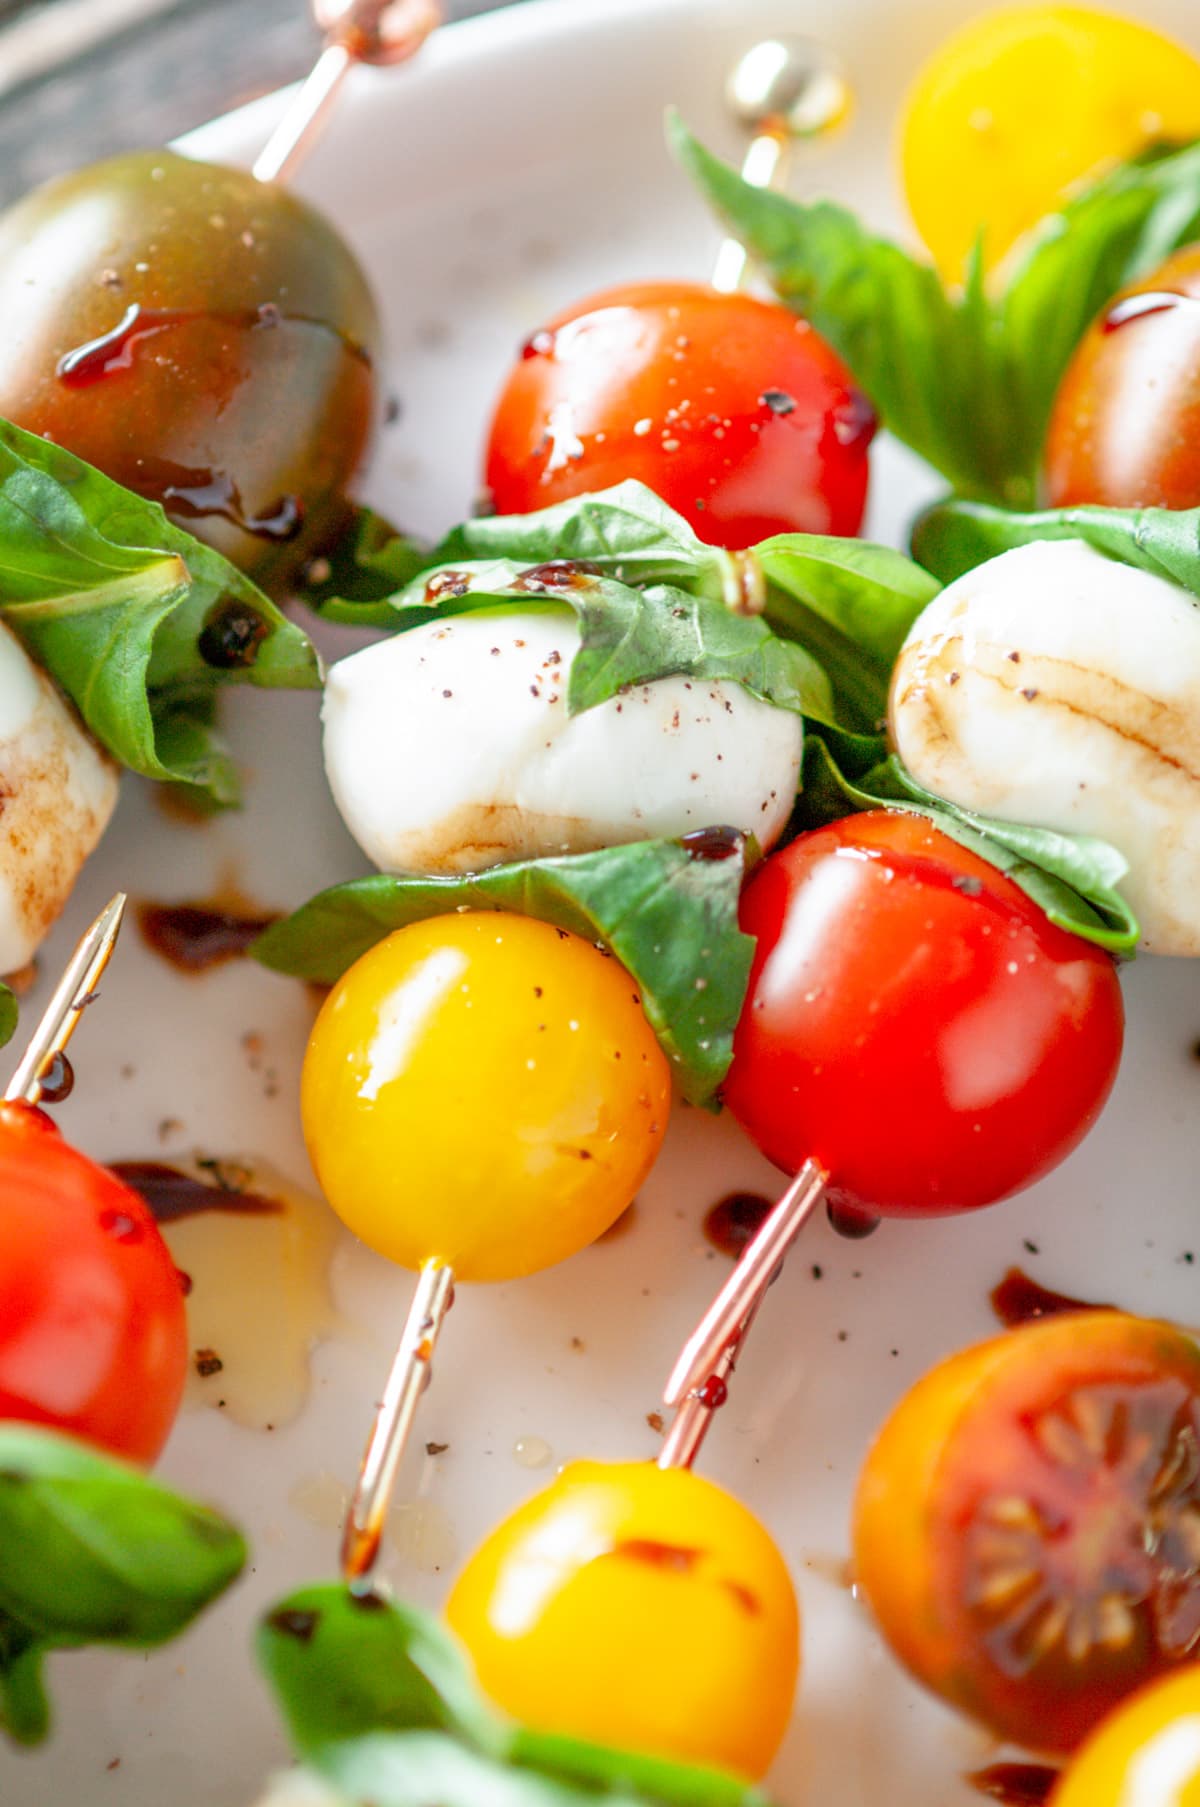 Caprese Salad Bites with heirloom cherry tomatoes, mozzarella balls, and fresh basil skewers on white plate